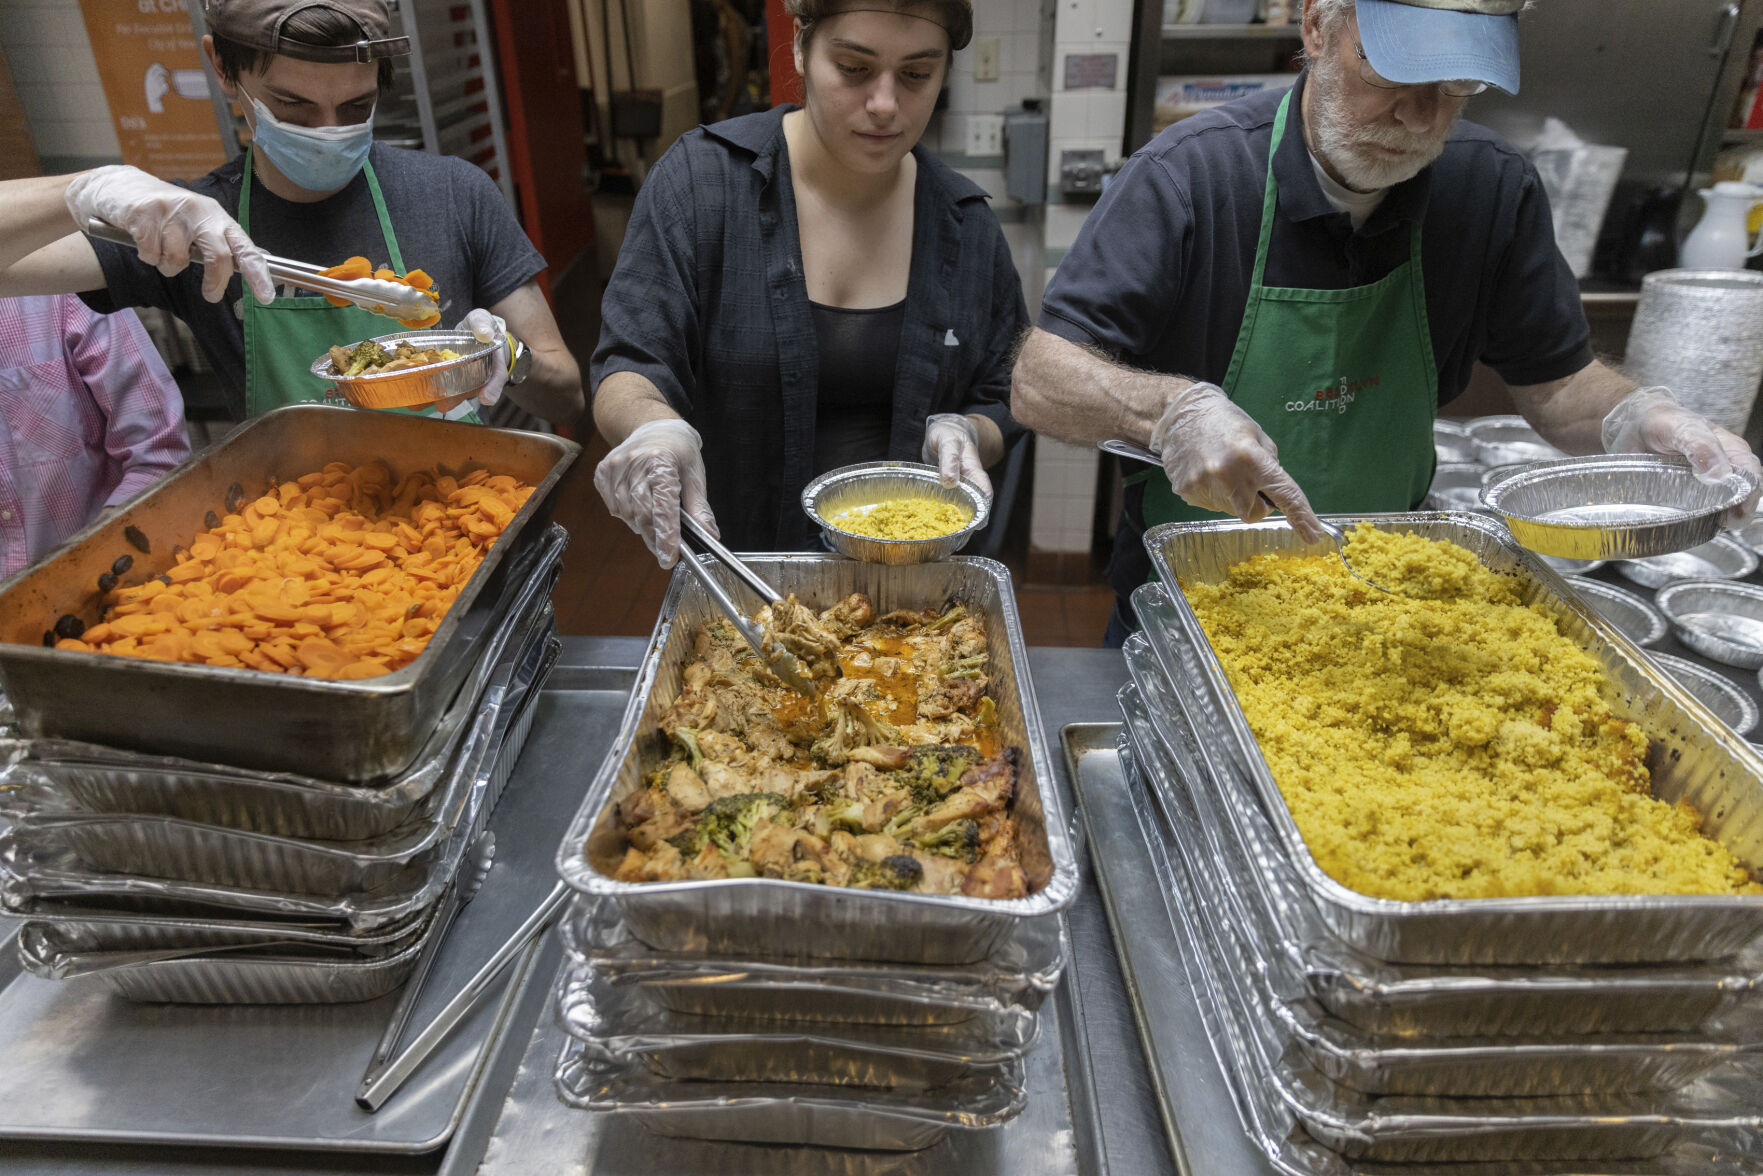 <p>Nicholas Loud, left, Sophie Thurschwell, center, and Peter Woll prepare lunch boxes at Community Help in Park Slope, a soup kitchen and food pantry better known as CHiPS, on Friday, June 16, 2023 in New York. Charitable giving in the United States declined in 2022. The downturn in giving has led to issues at CHiPS, as it has in many charities across the country. (AP Photo/Jeenah Moon)</p>   PHOTO CREDIT: Jeenah Moon